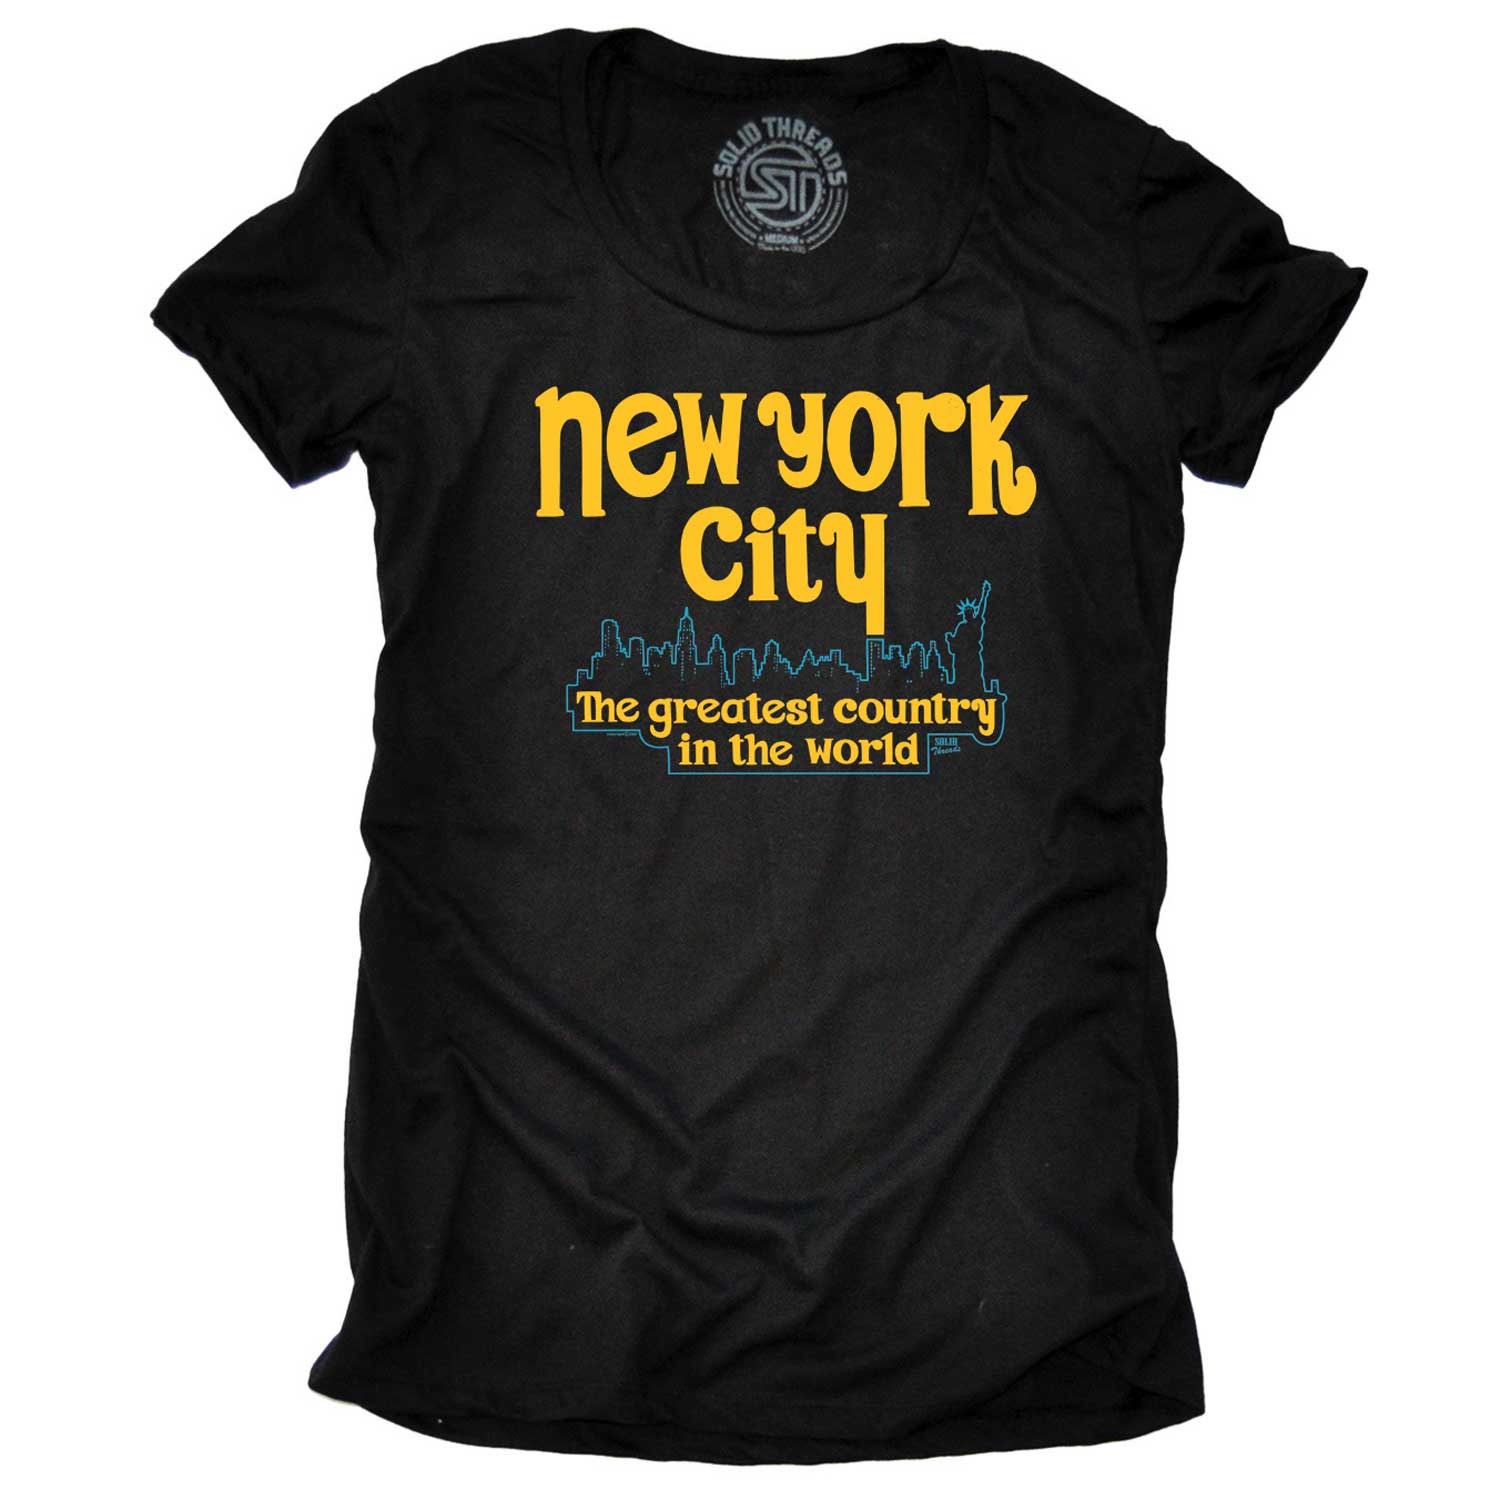 Women's New York City The Greatest Country In the World Vintage Inspired T-shirt | Funny NYC Graphic Tee On Model| Solid Threads